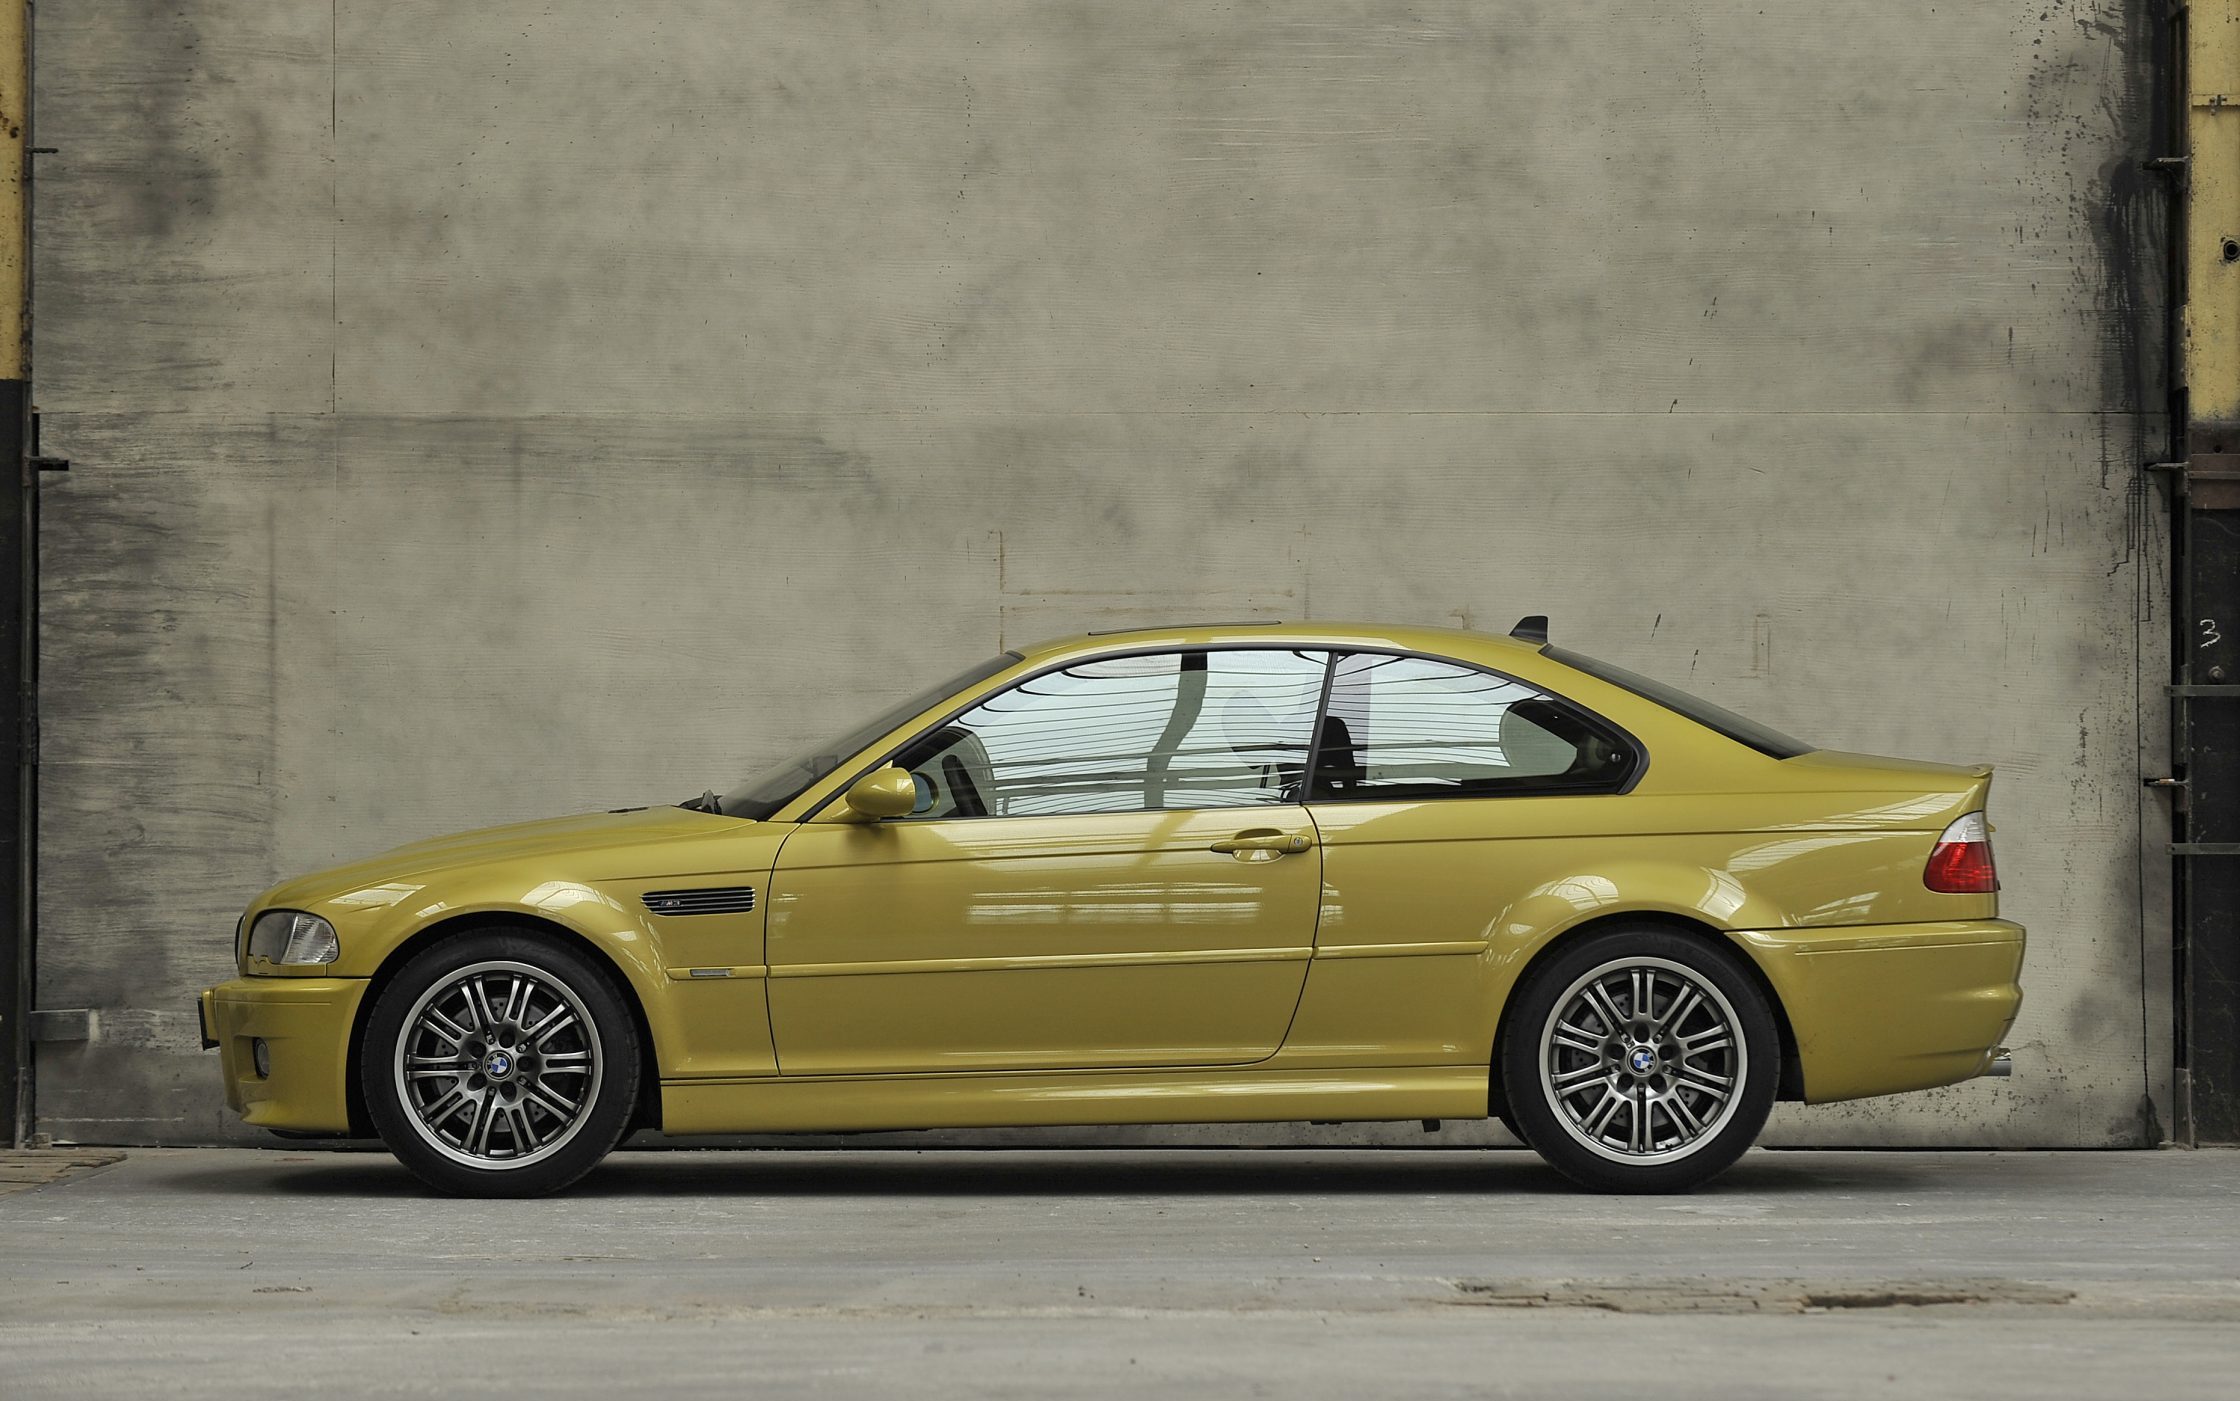 The BMW E46 M3 CSL Is Getting Seriously Expensive